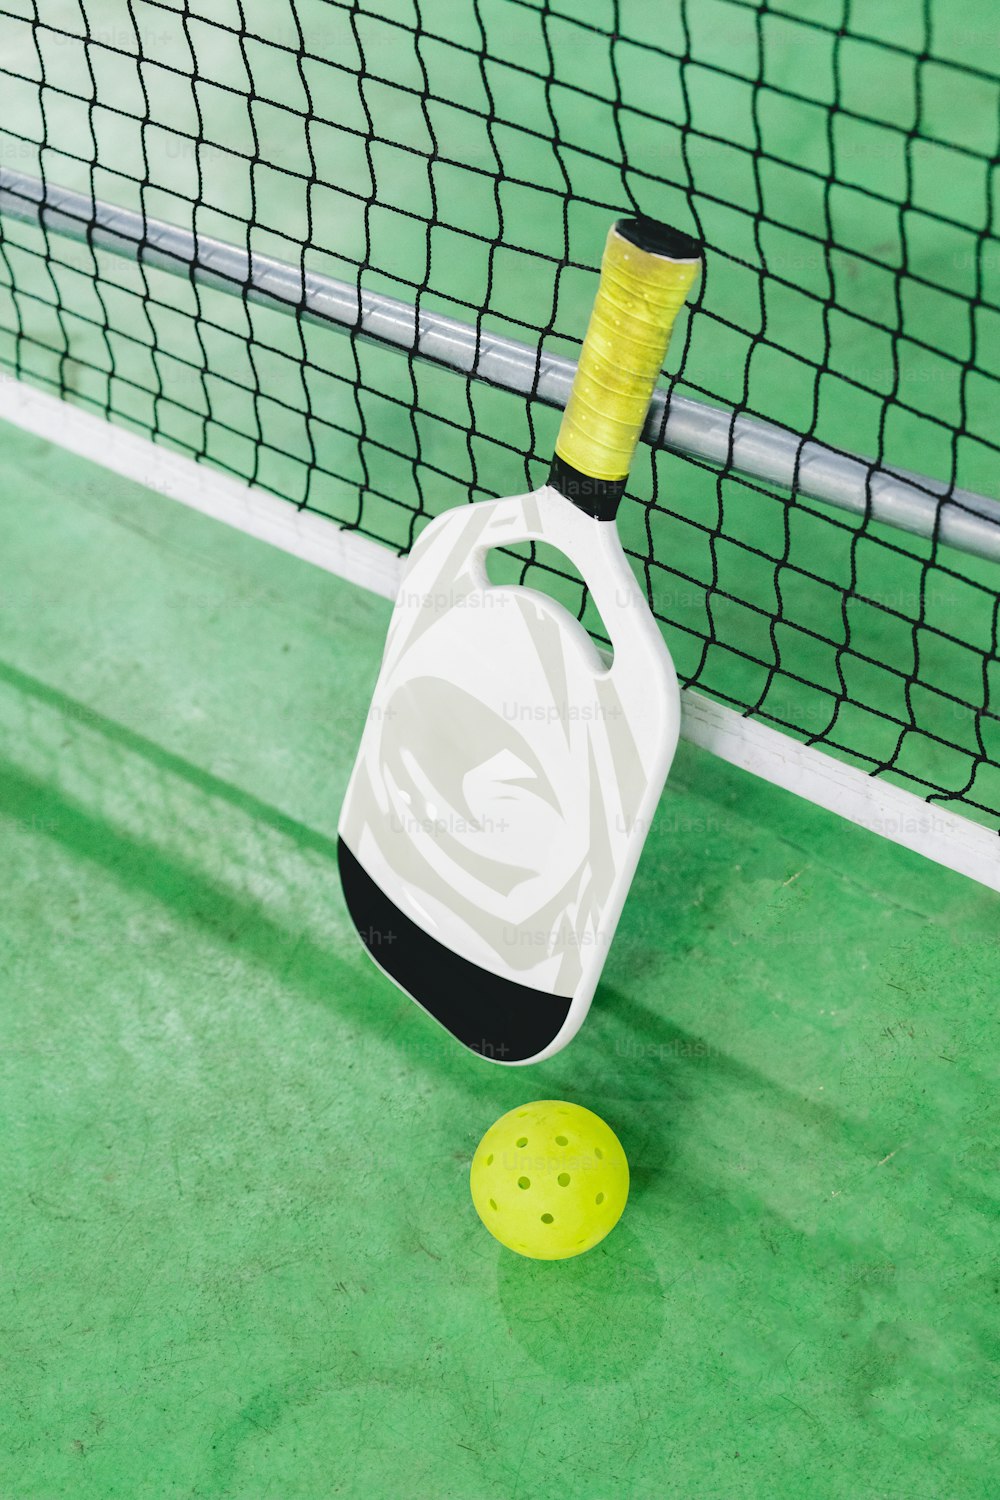 a tennis racket and ball on a court